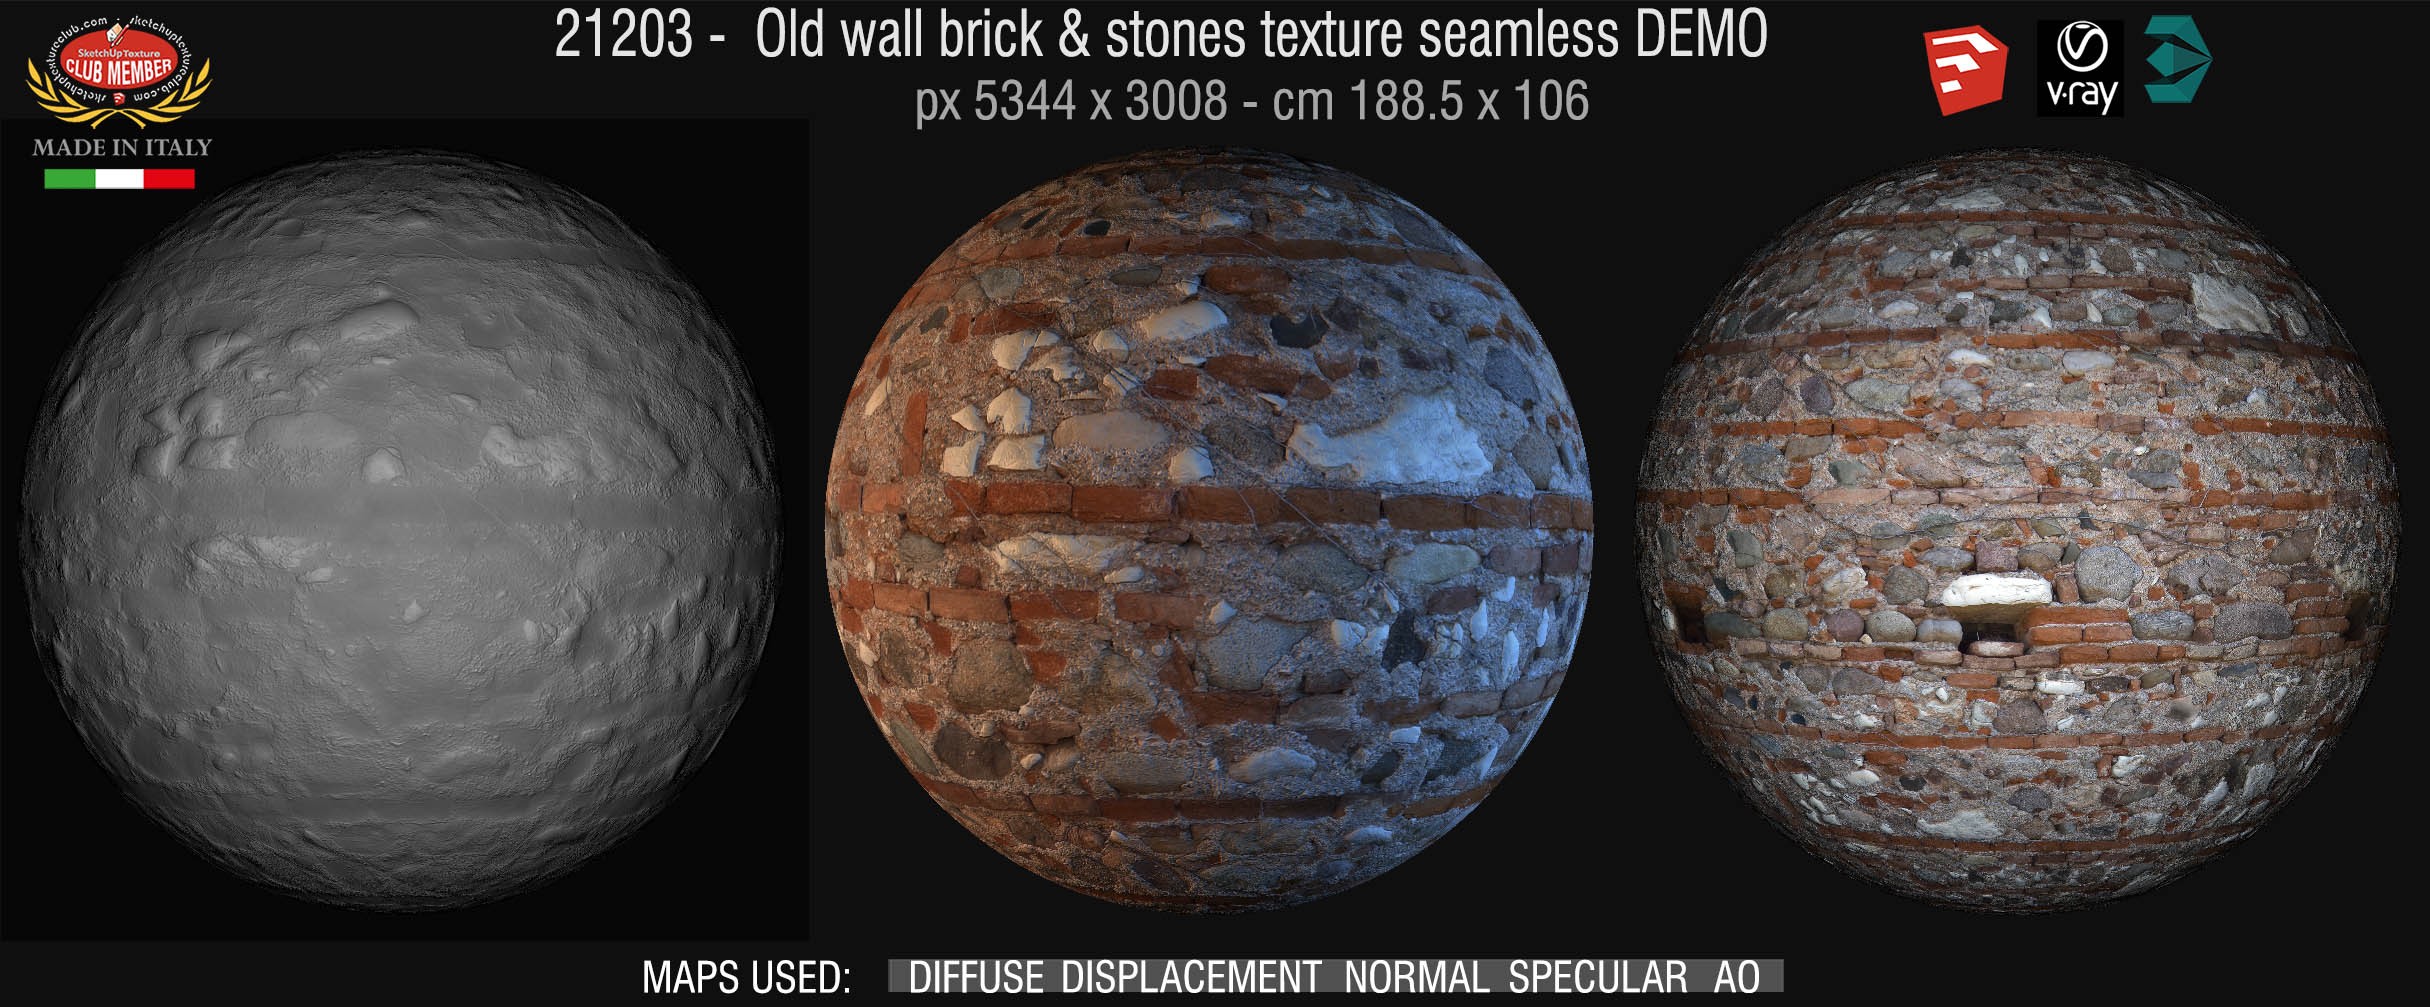 21203 Old wall brick & stones texture + maps DEMO